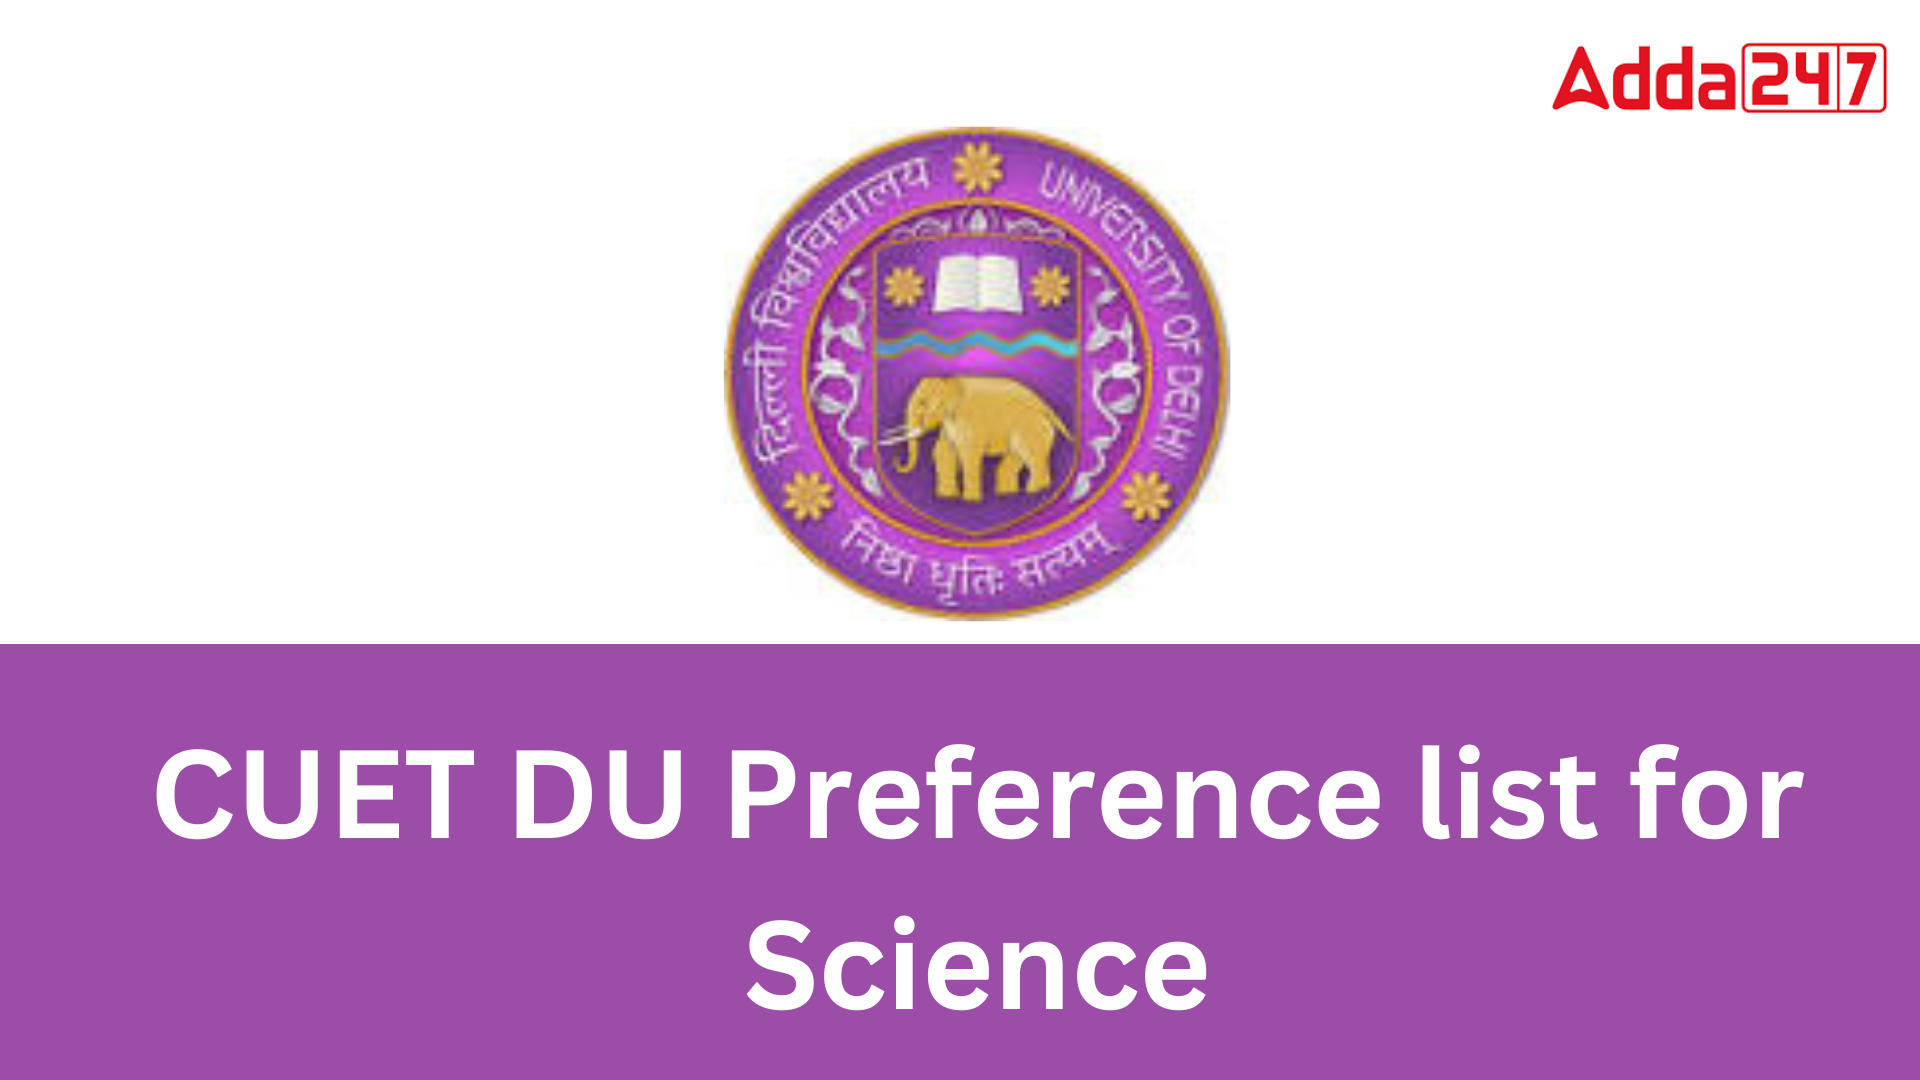 CUET DU Preference list for Science